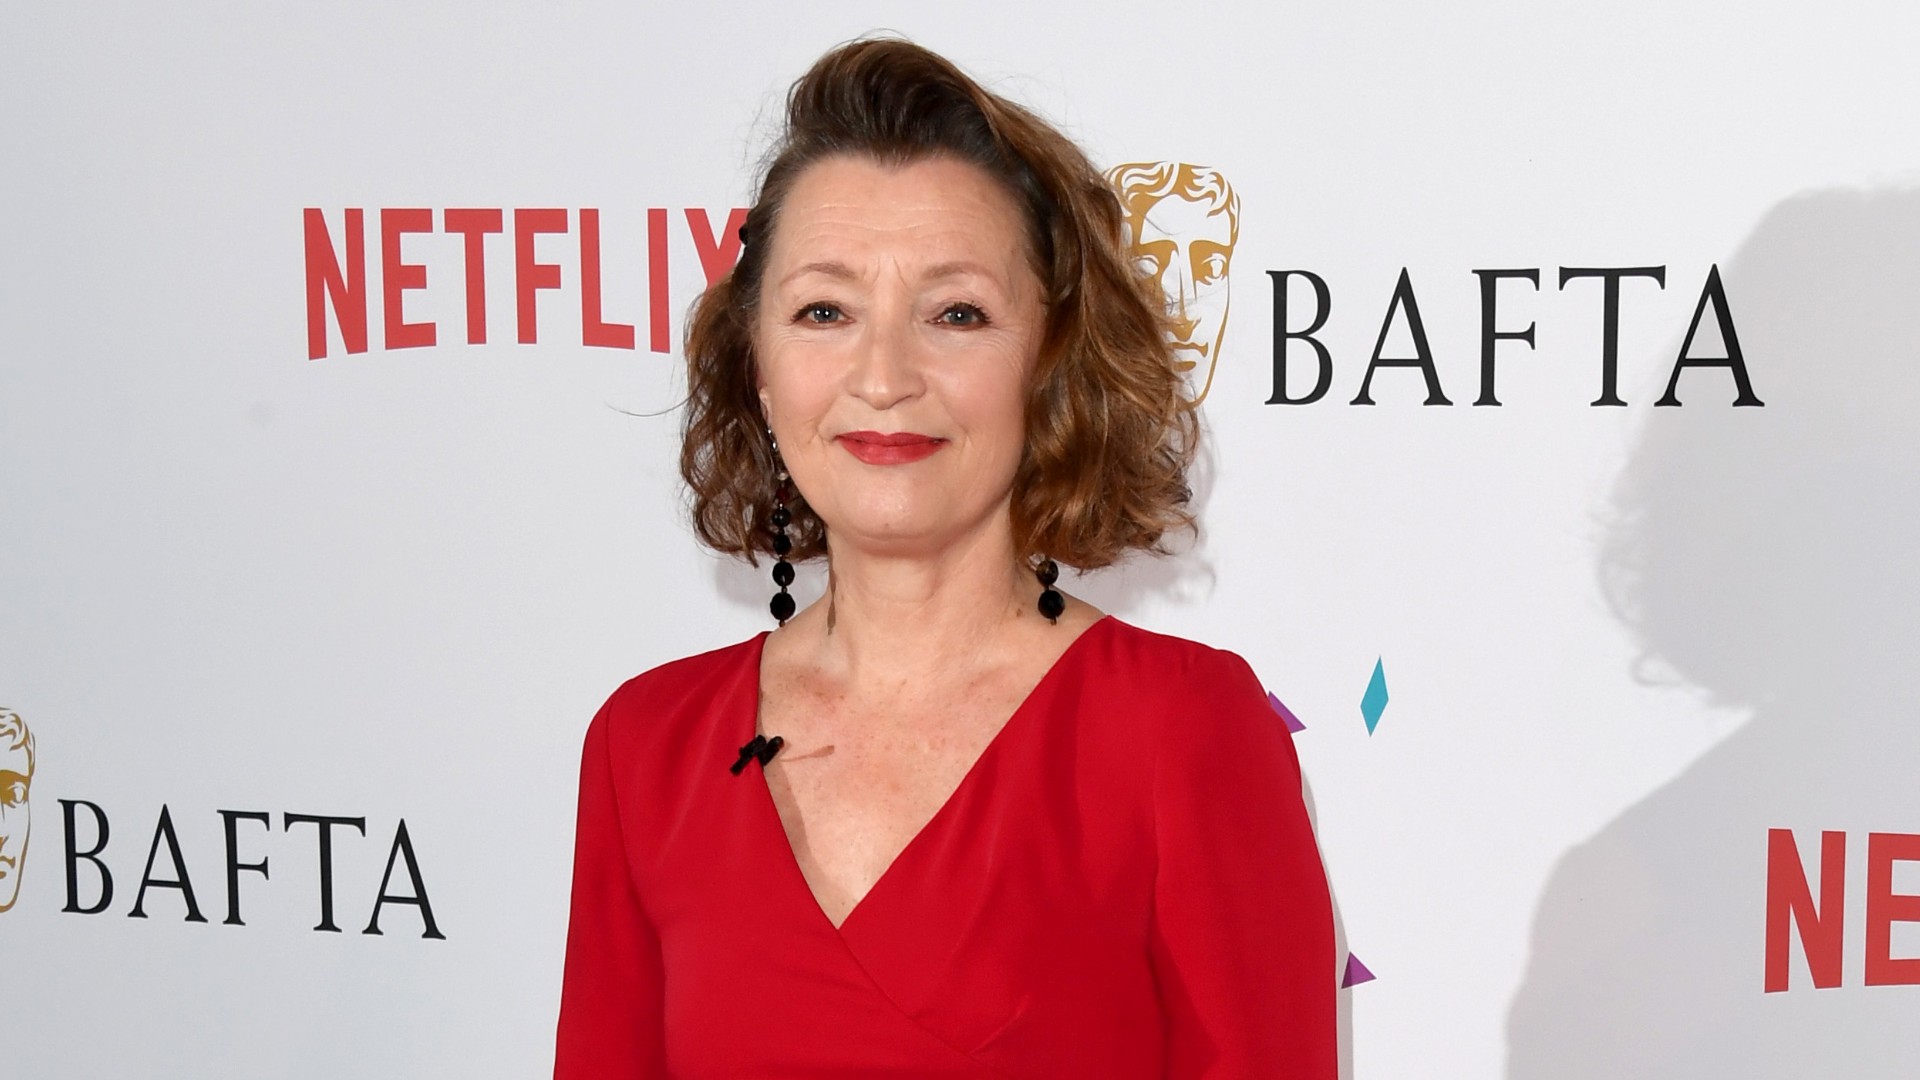 Casting News: Lesley Manville to Star in TV Adaptation of Anthony Horowitz's 'Magpie Murders'